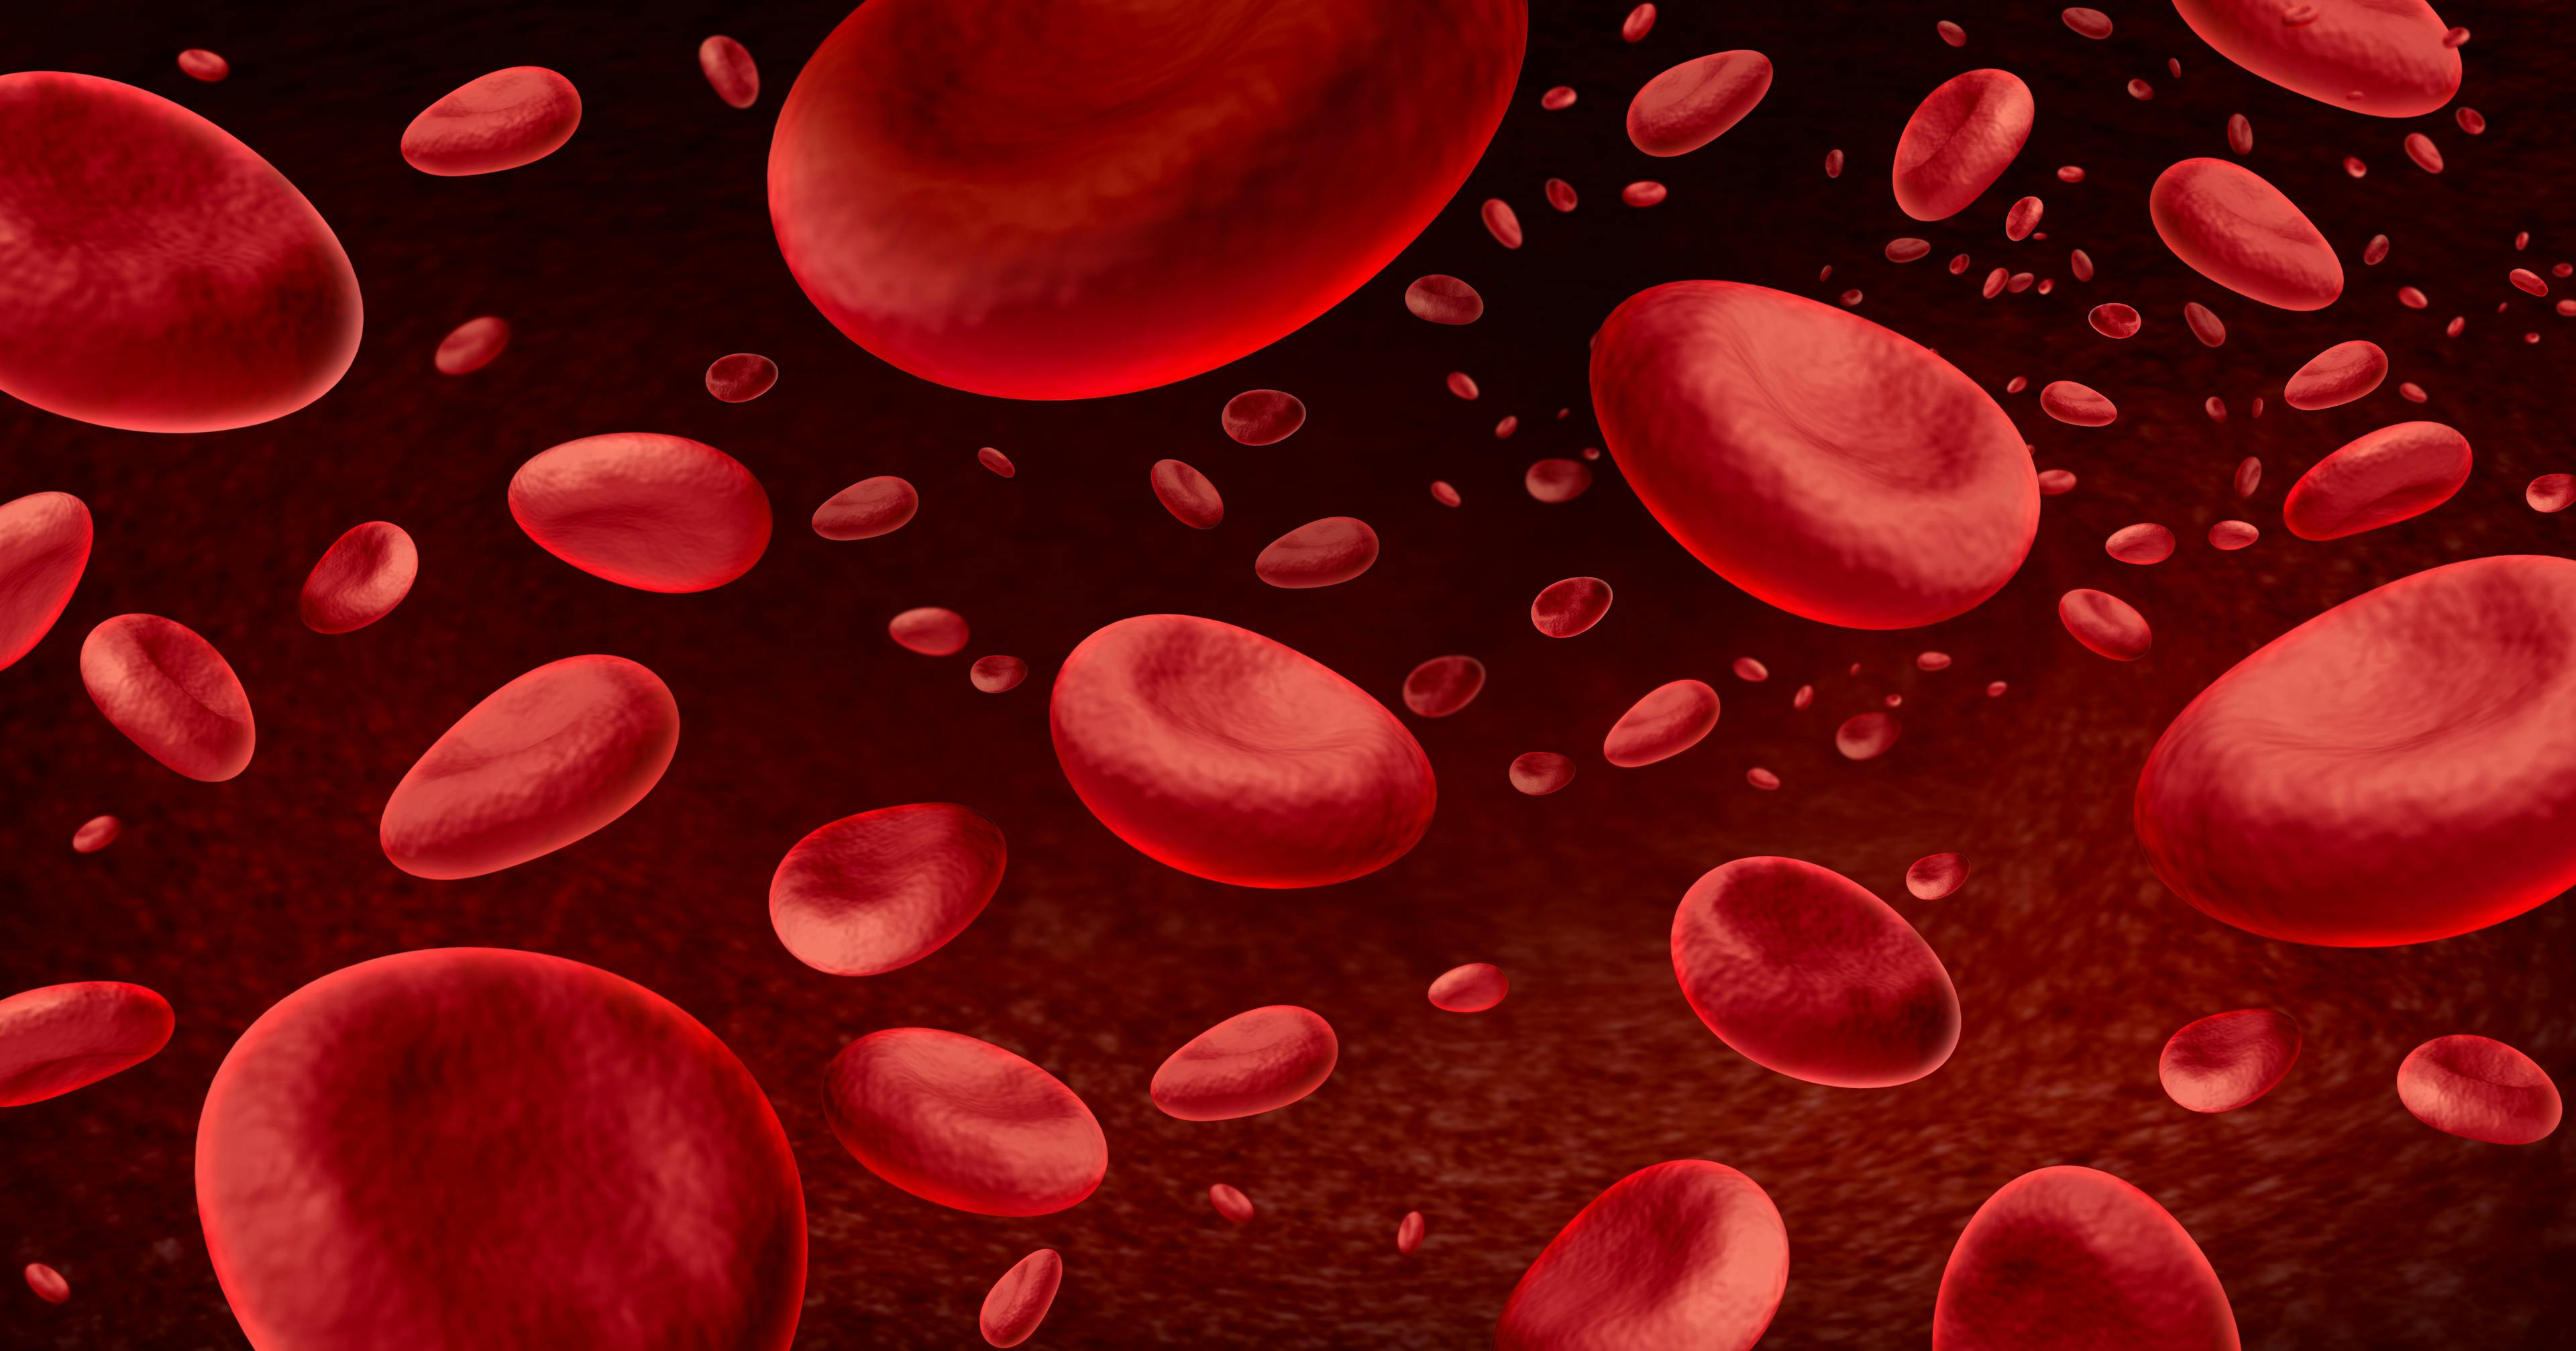 Blood cells Background and Hematology with blood as a concept of the immune system through immunology as microscopic biology hemoglobin symbol inside the human body | Image Credit: © freshidea - stock.adobe.com